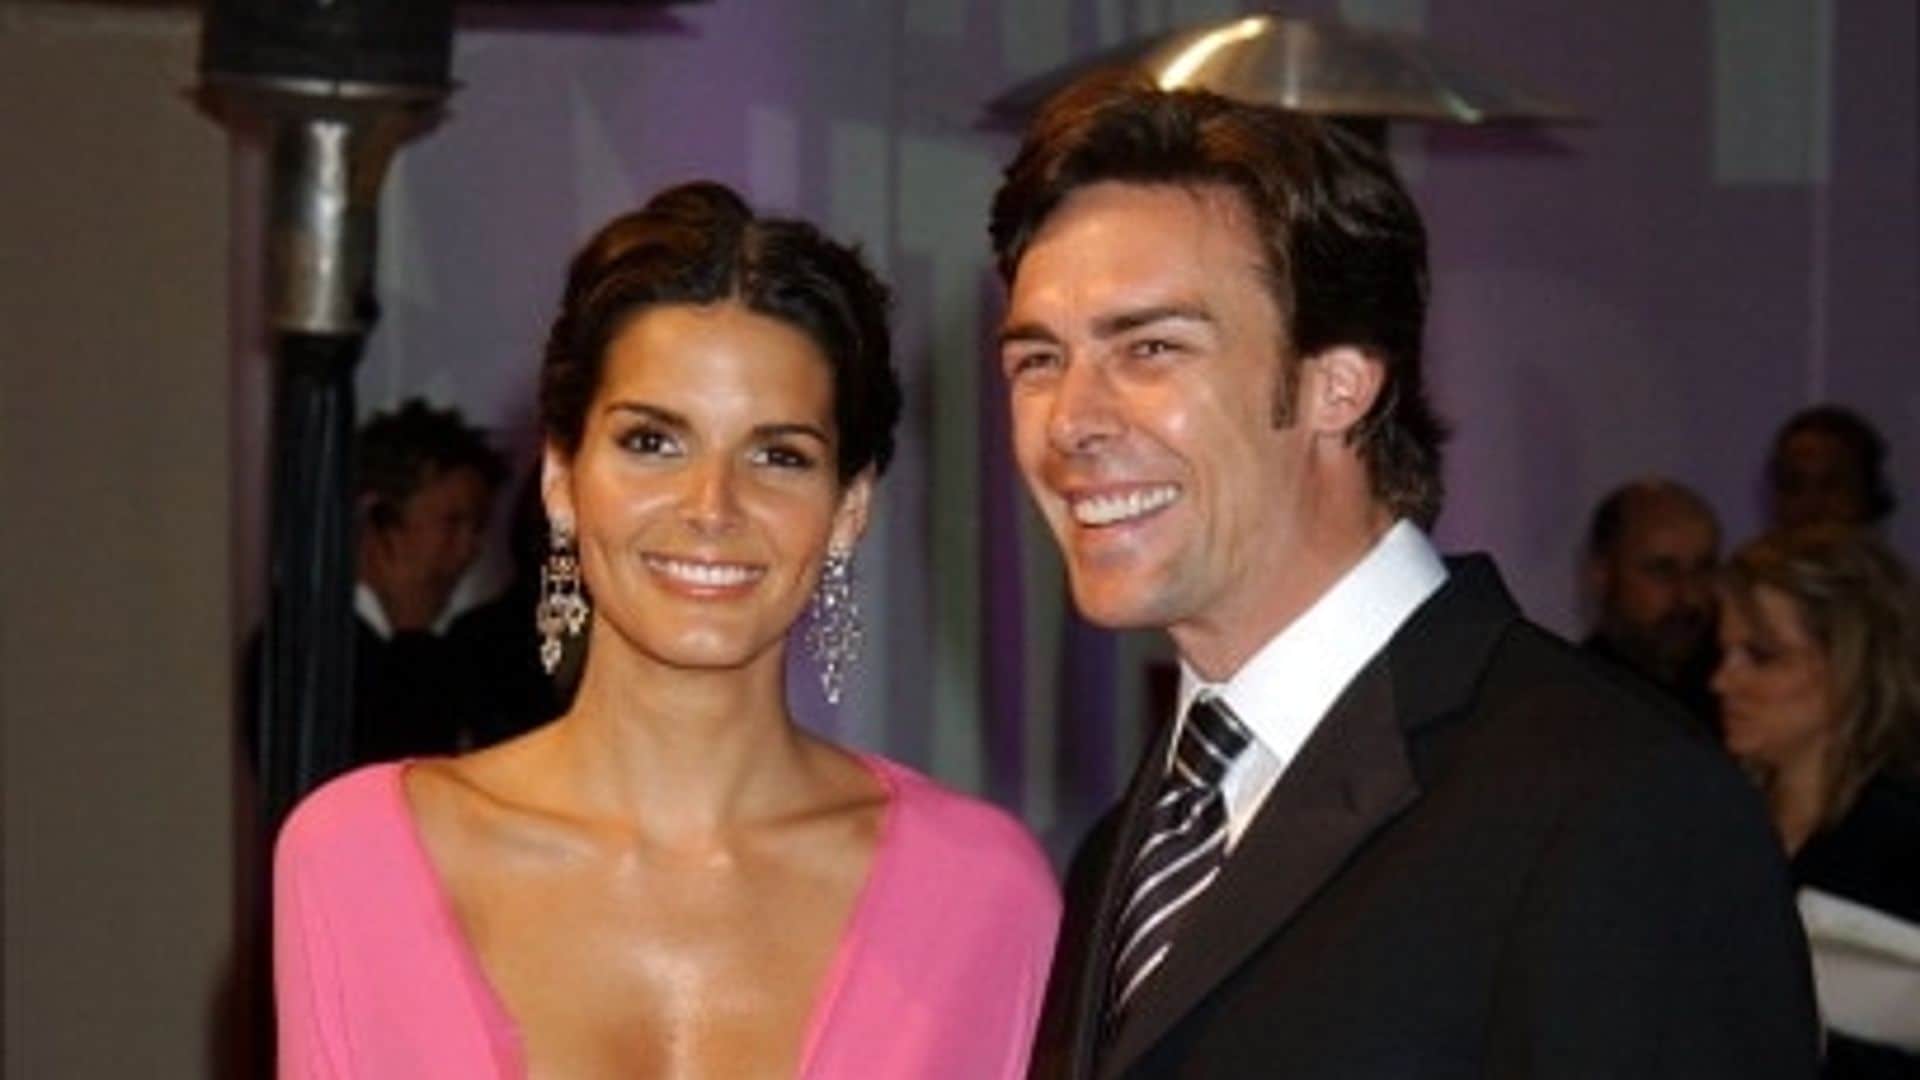 Angie Harmon and Jason Sehorn split after 13 years